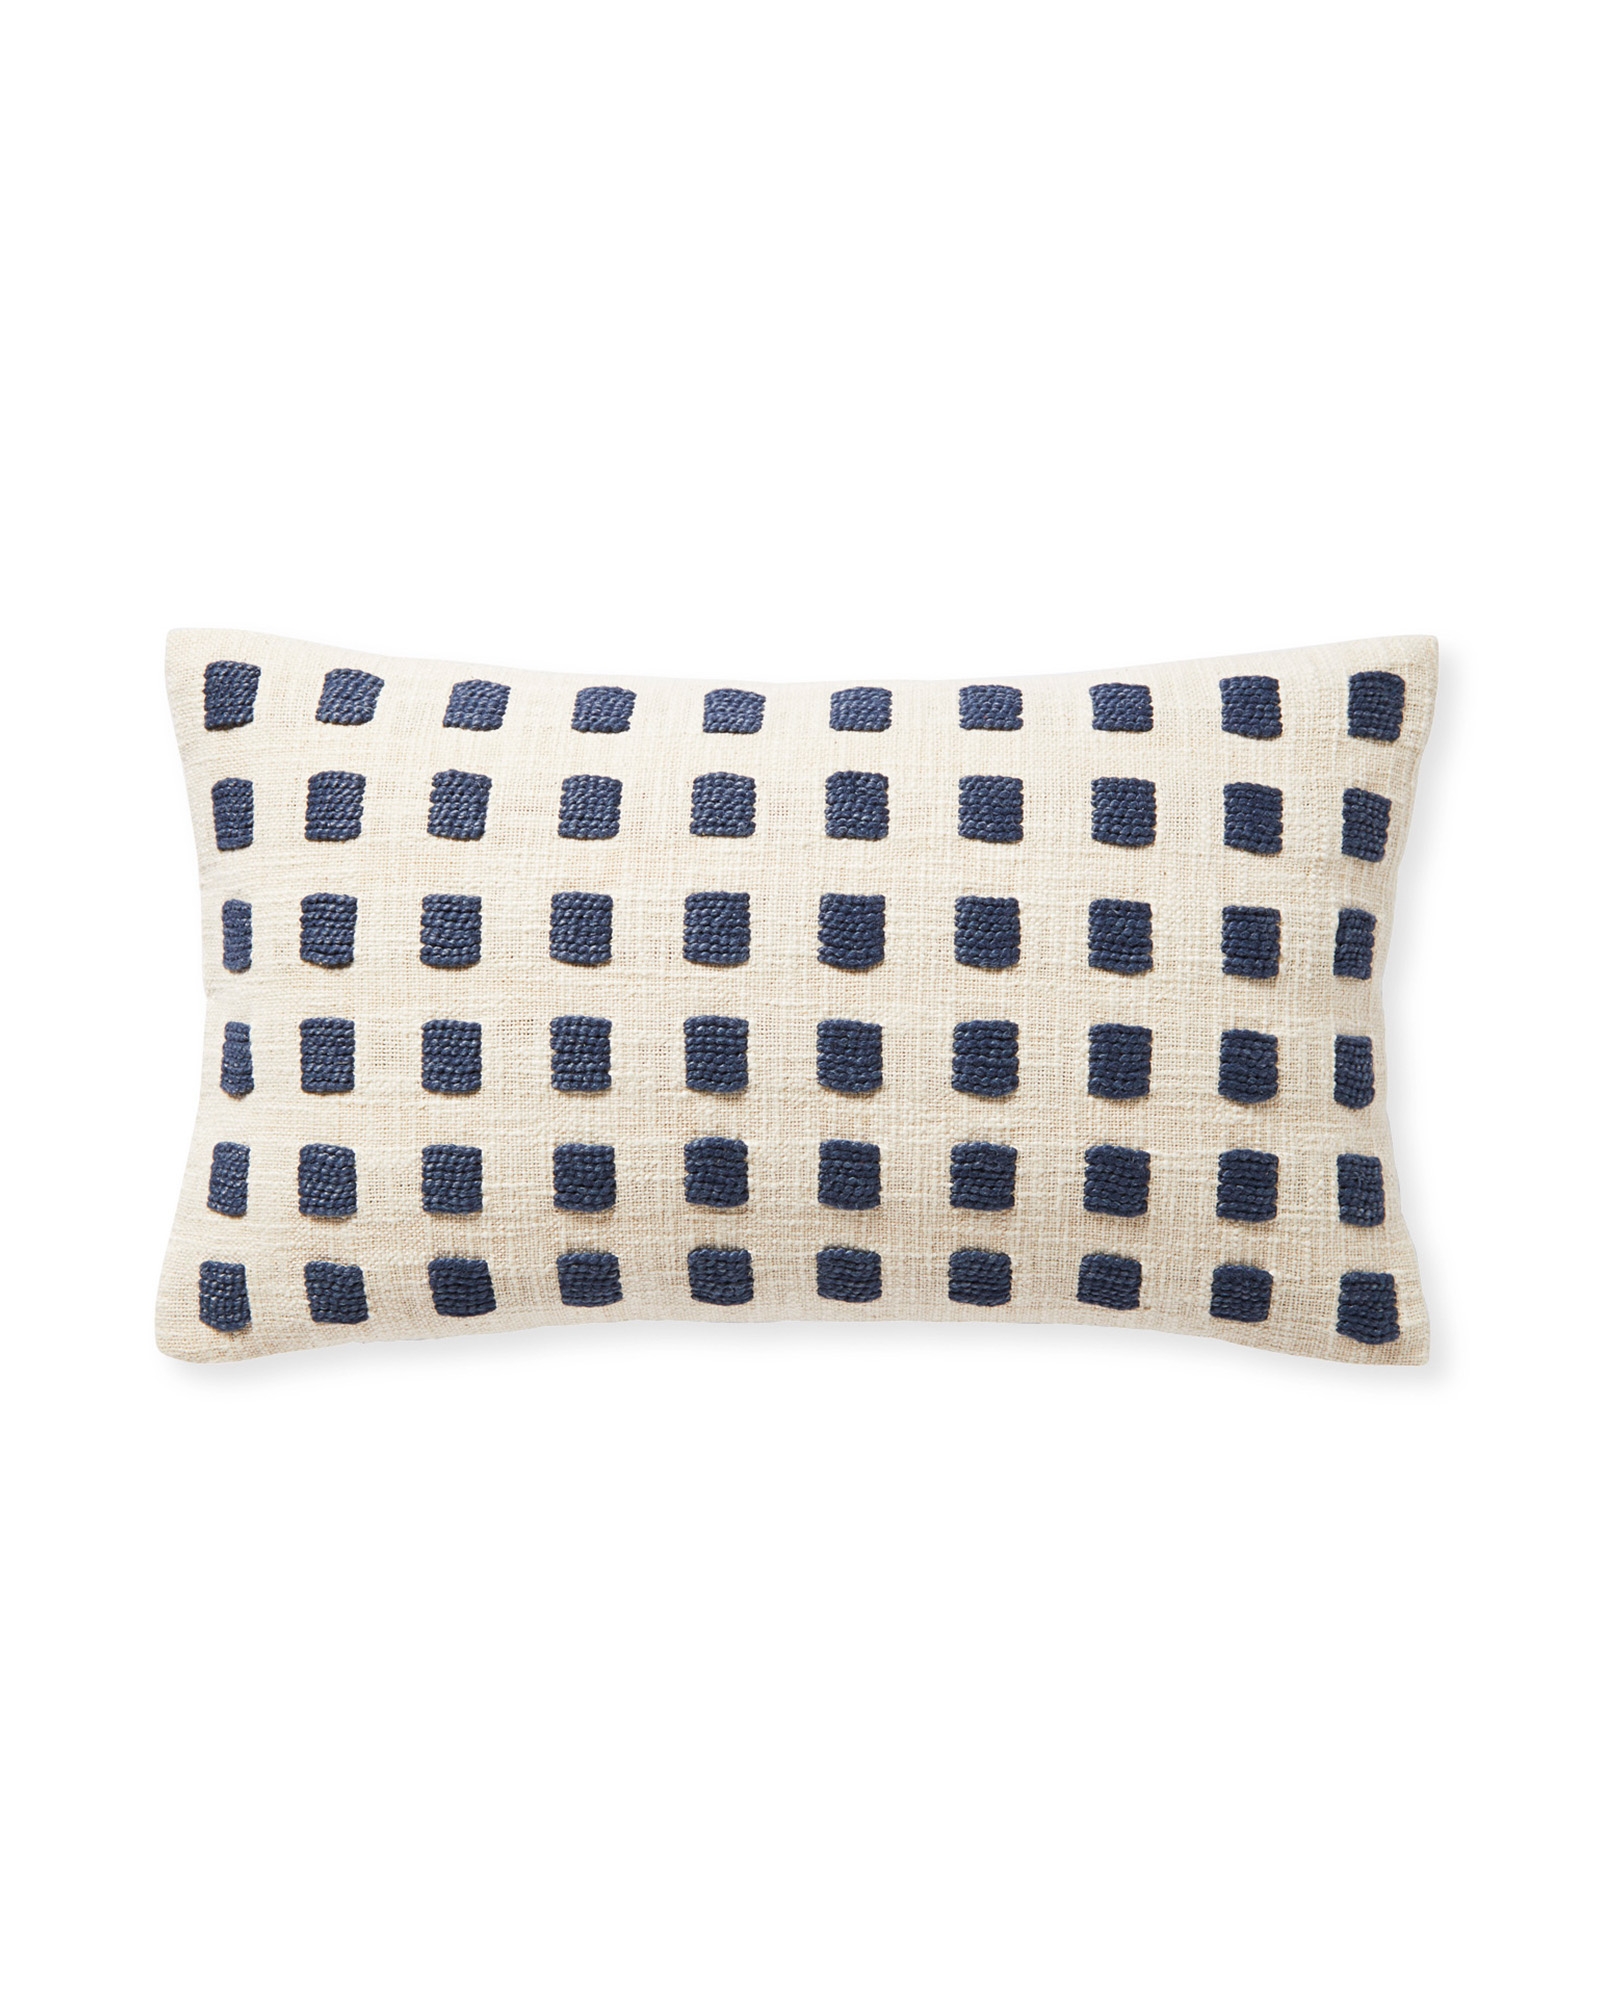 Pebble Cove Pillow Cover - Image 1